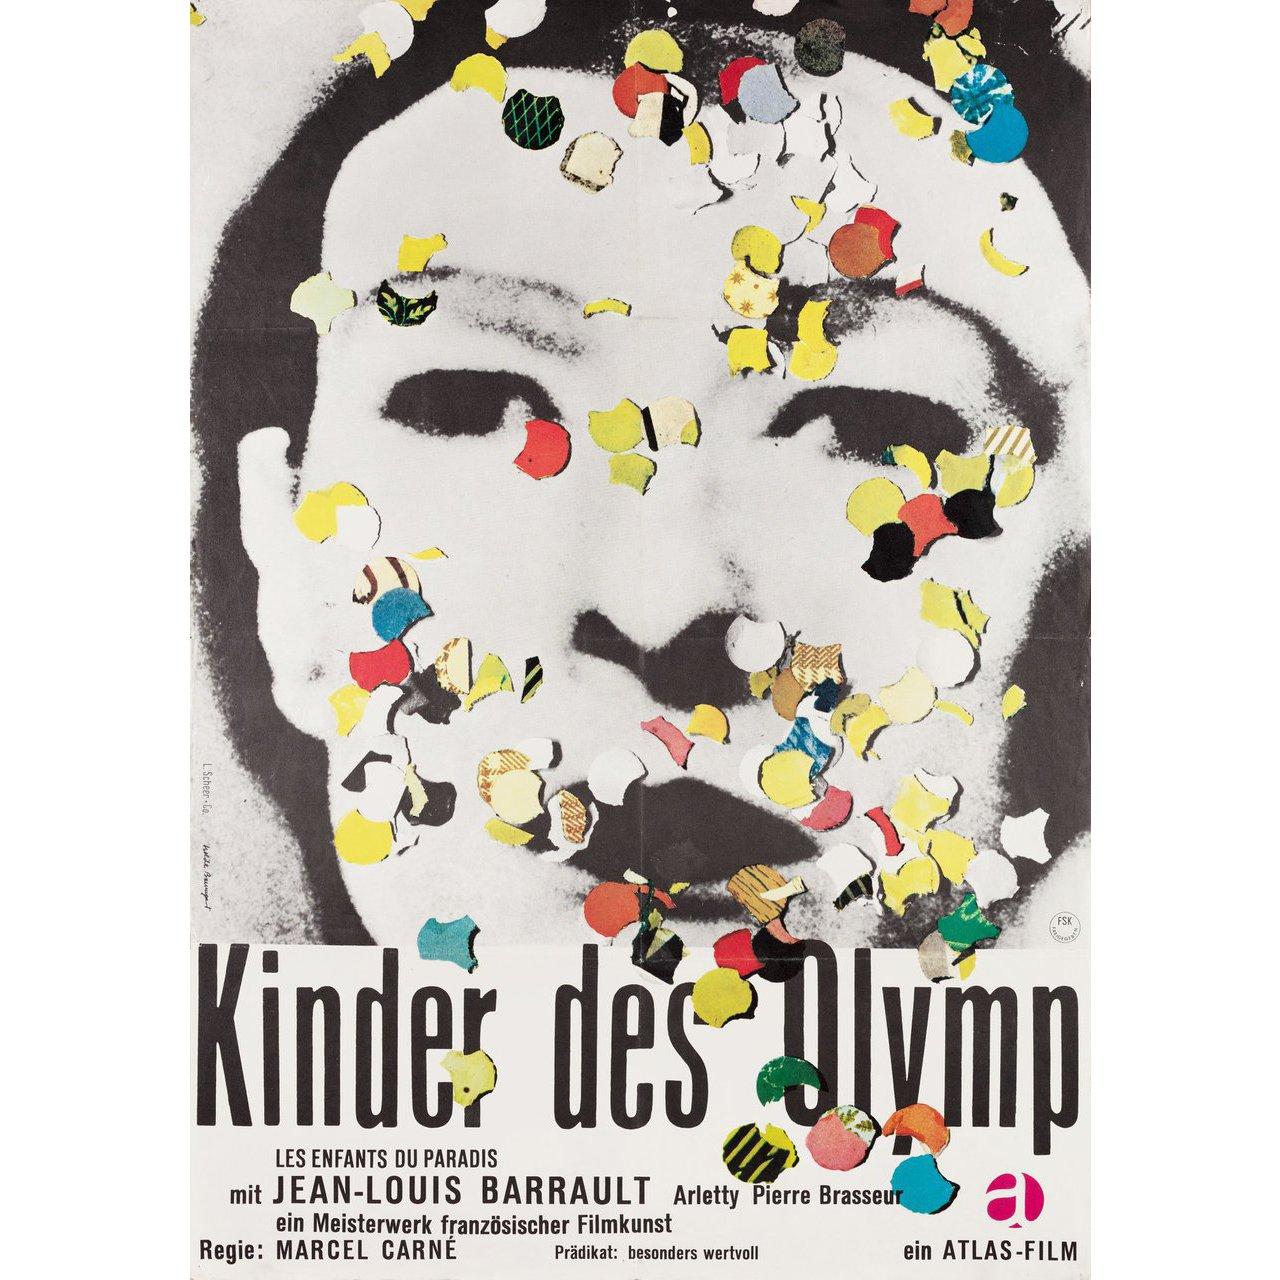 Original 1966 re-release German A1 poster by Isolde Baumgart for the 1945 film Les Enfants du Paradis (Children of Paradise) directed by Marcel Carne with Arletty / Jean-Louis Barrault / Pierre Brasseur / Pierre Renoir. Very Good-Fine condition,